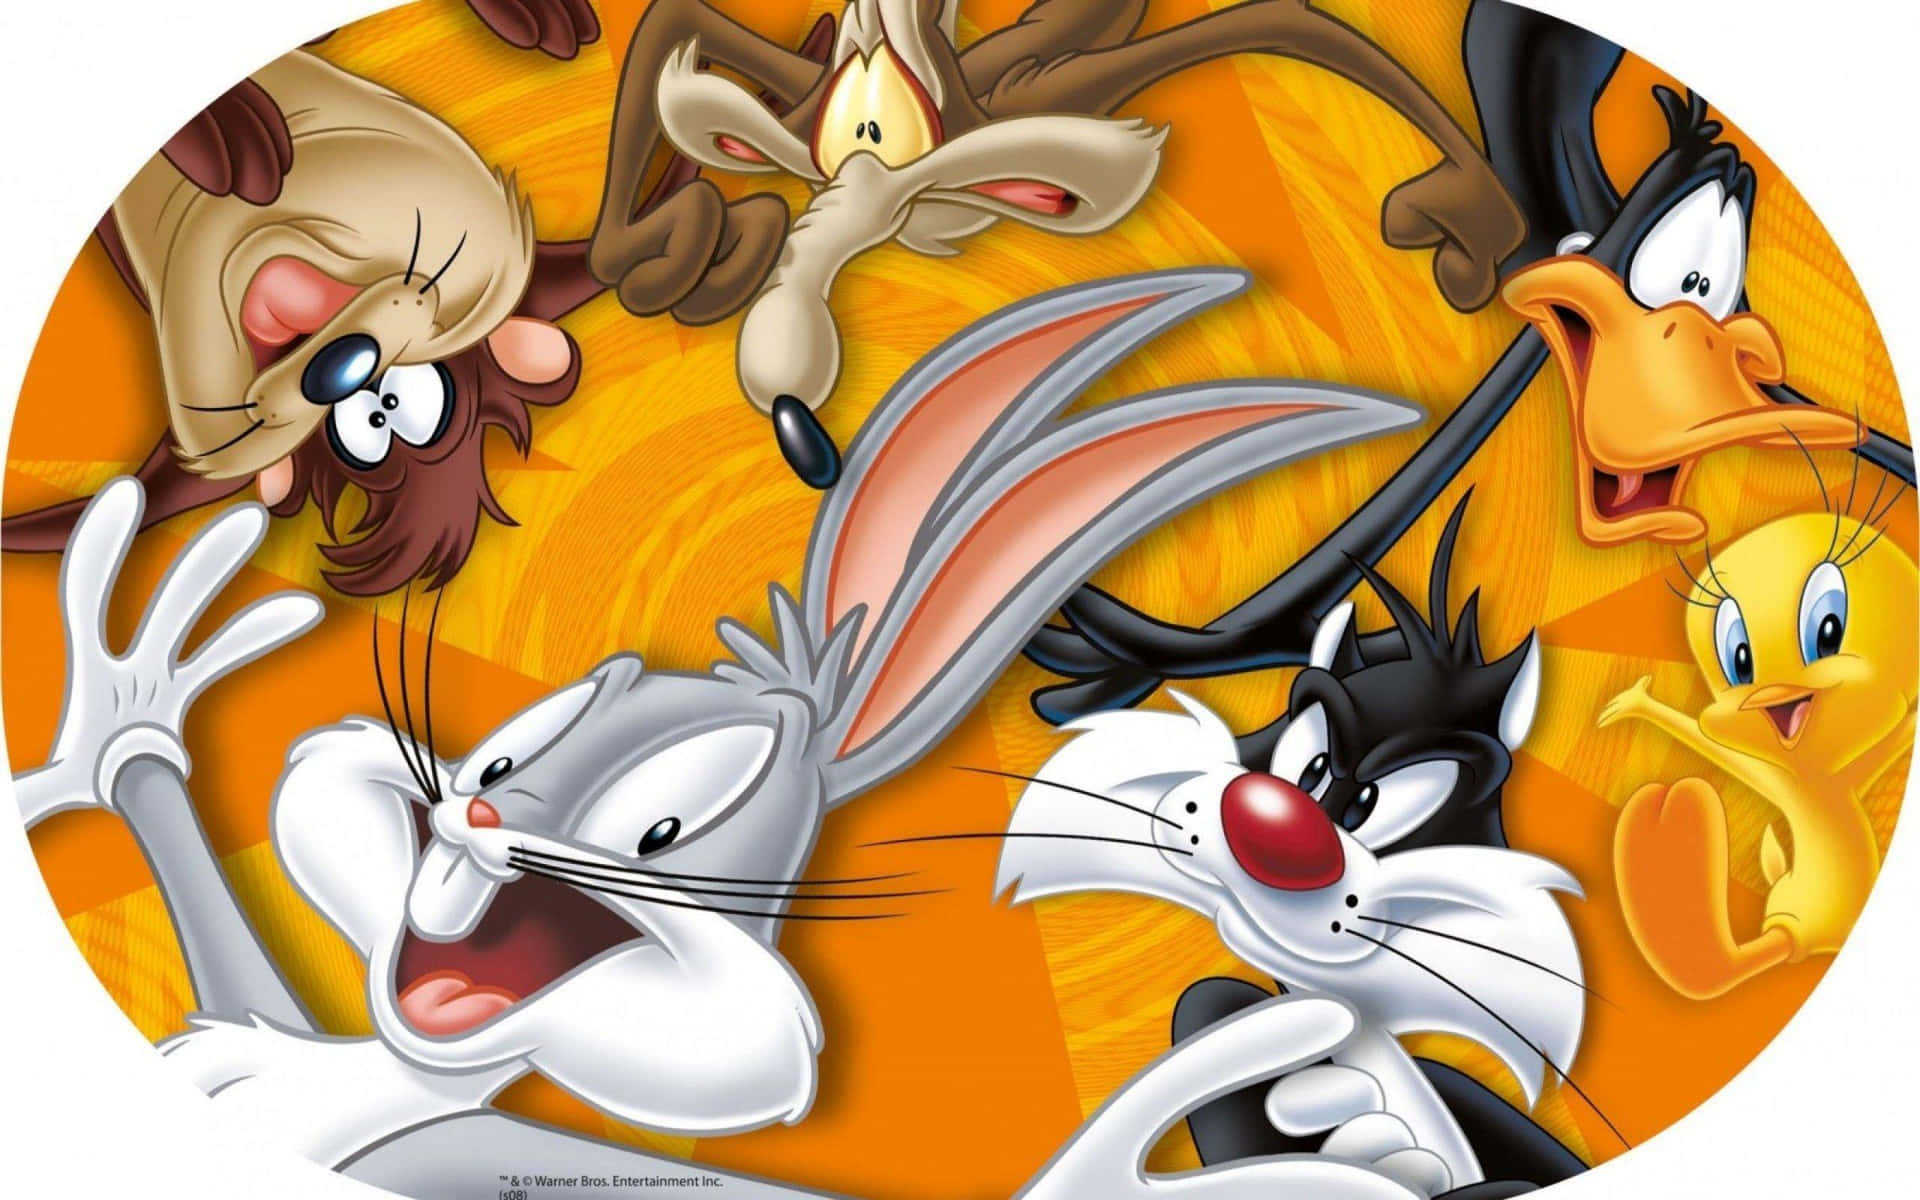 Laughing Out Loud With Bugs Bunny